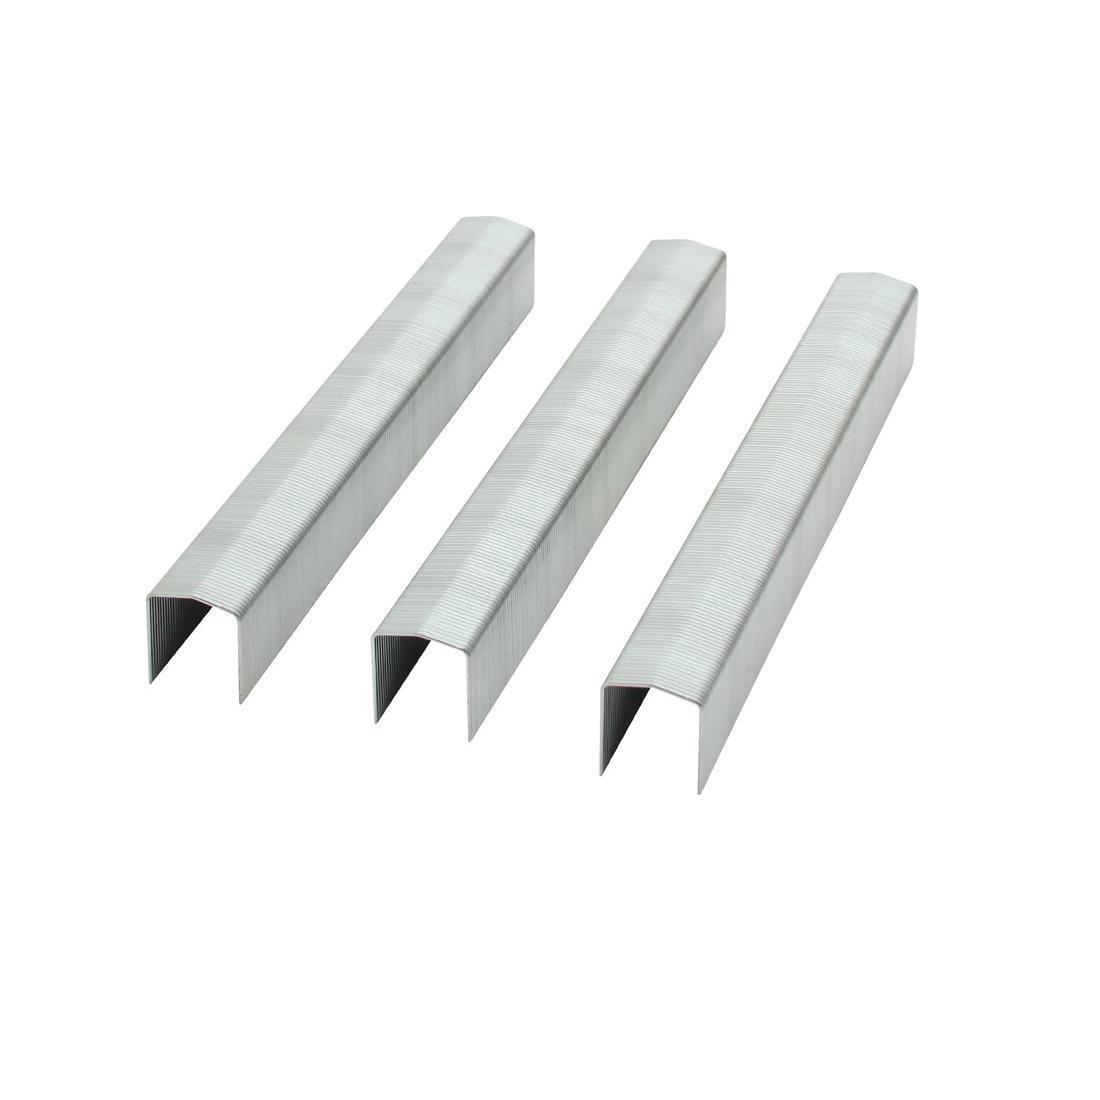 Bostitch® STCR26193/8 STCR 2619 Light Duty Staples, 3/8 in L Leg, Chisel Point, High Carbon Steel, 7/16 in W Crown